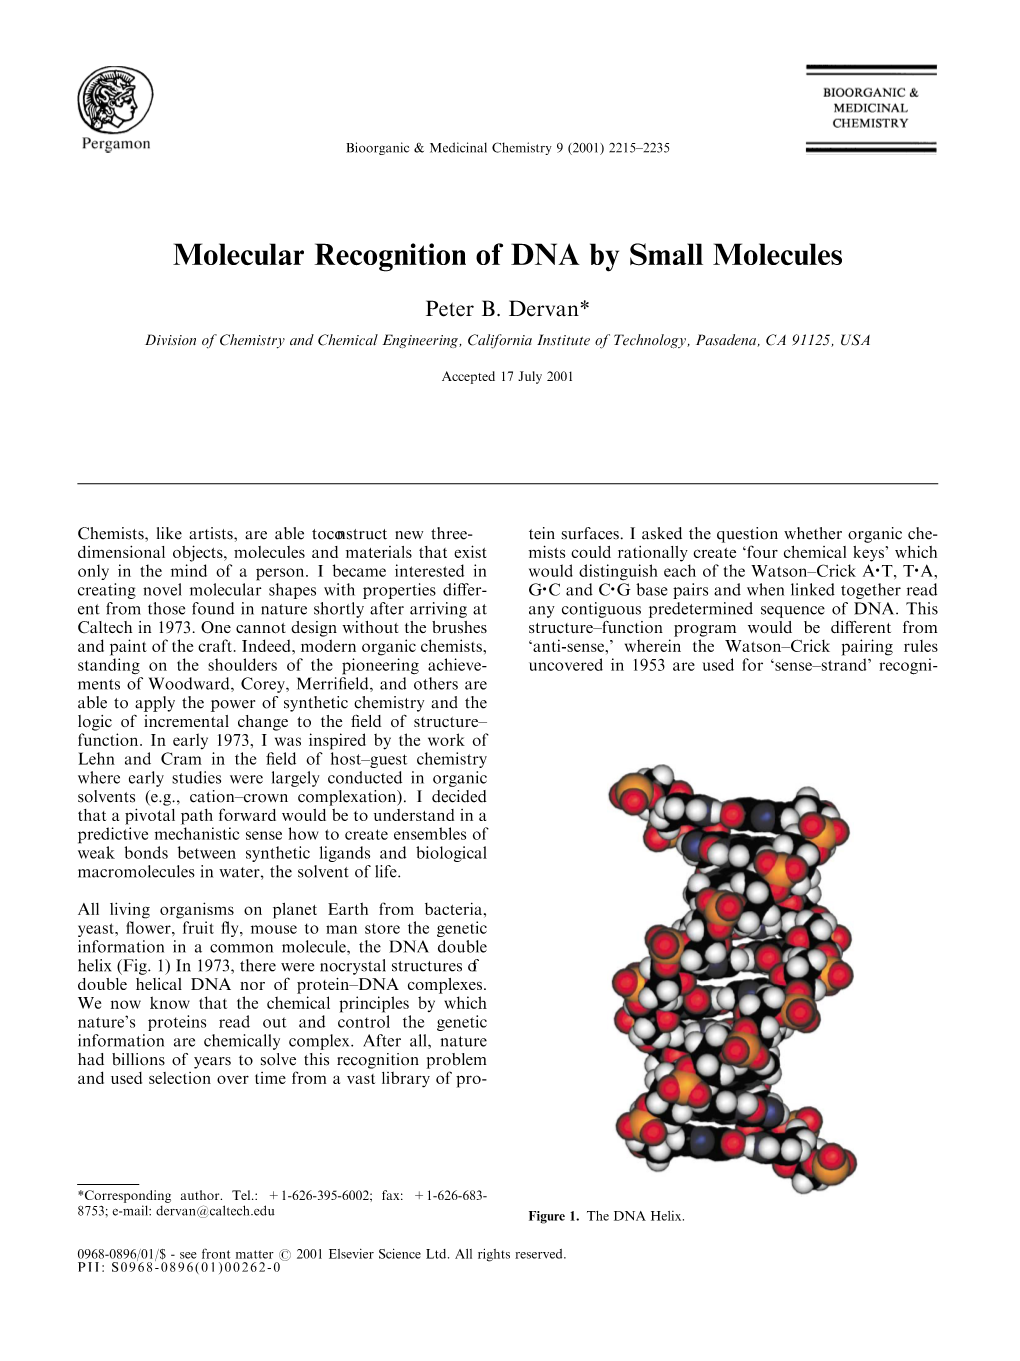 Molecular Recognition of DNA by Small Molecules